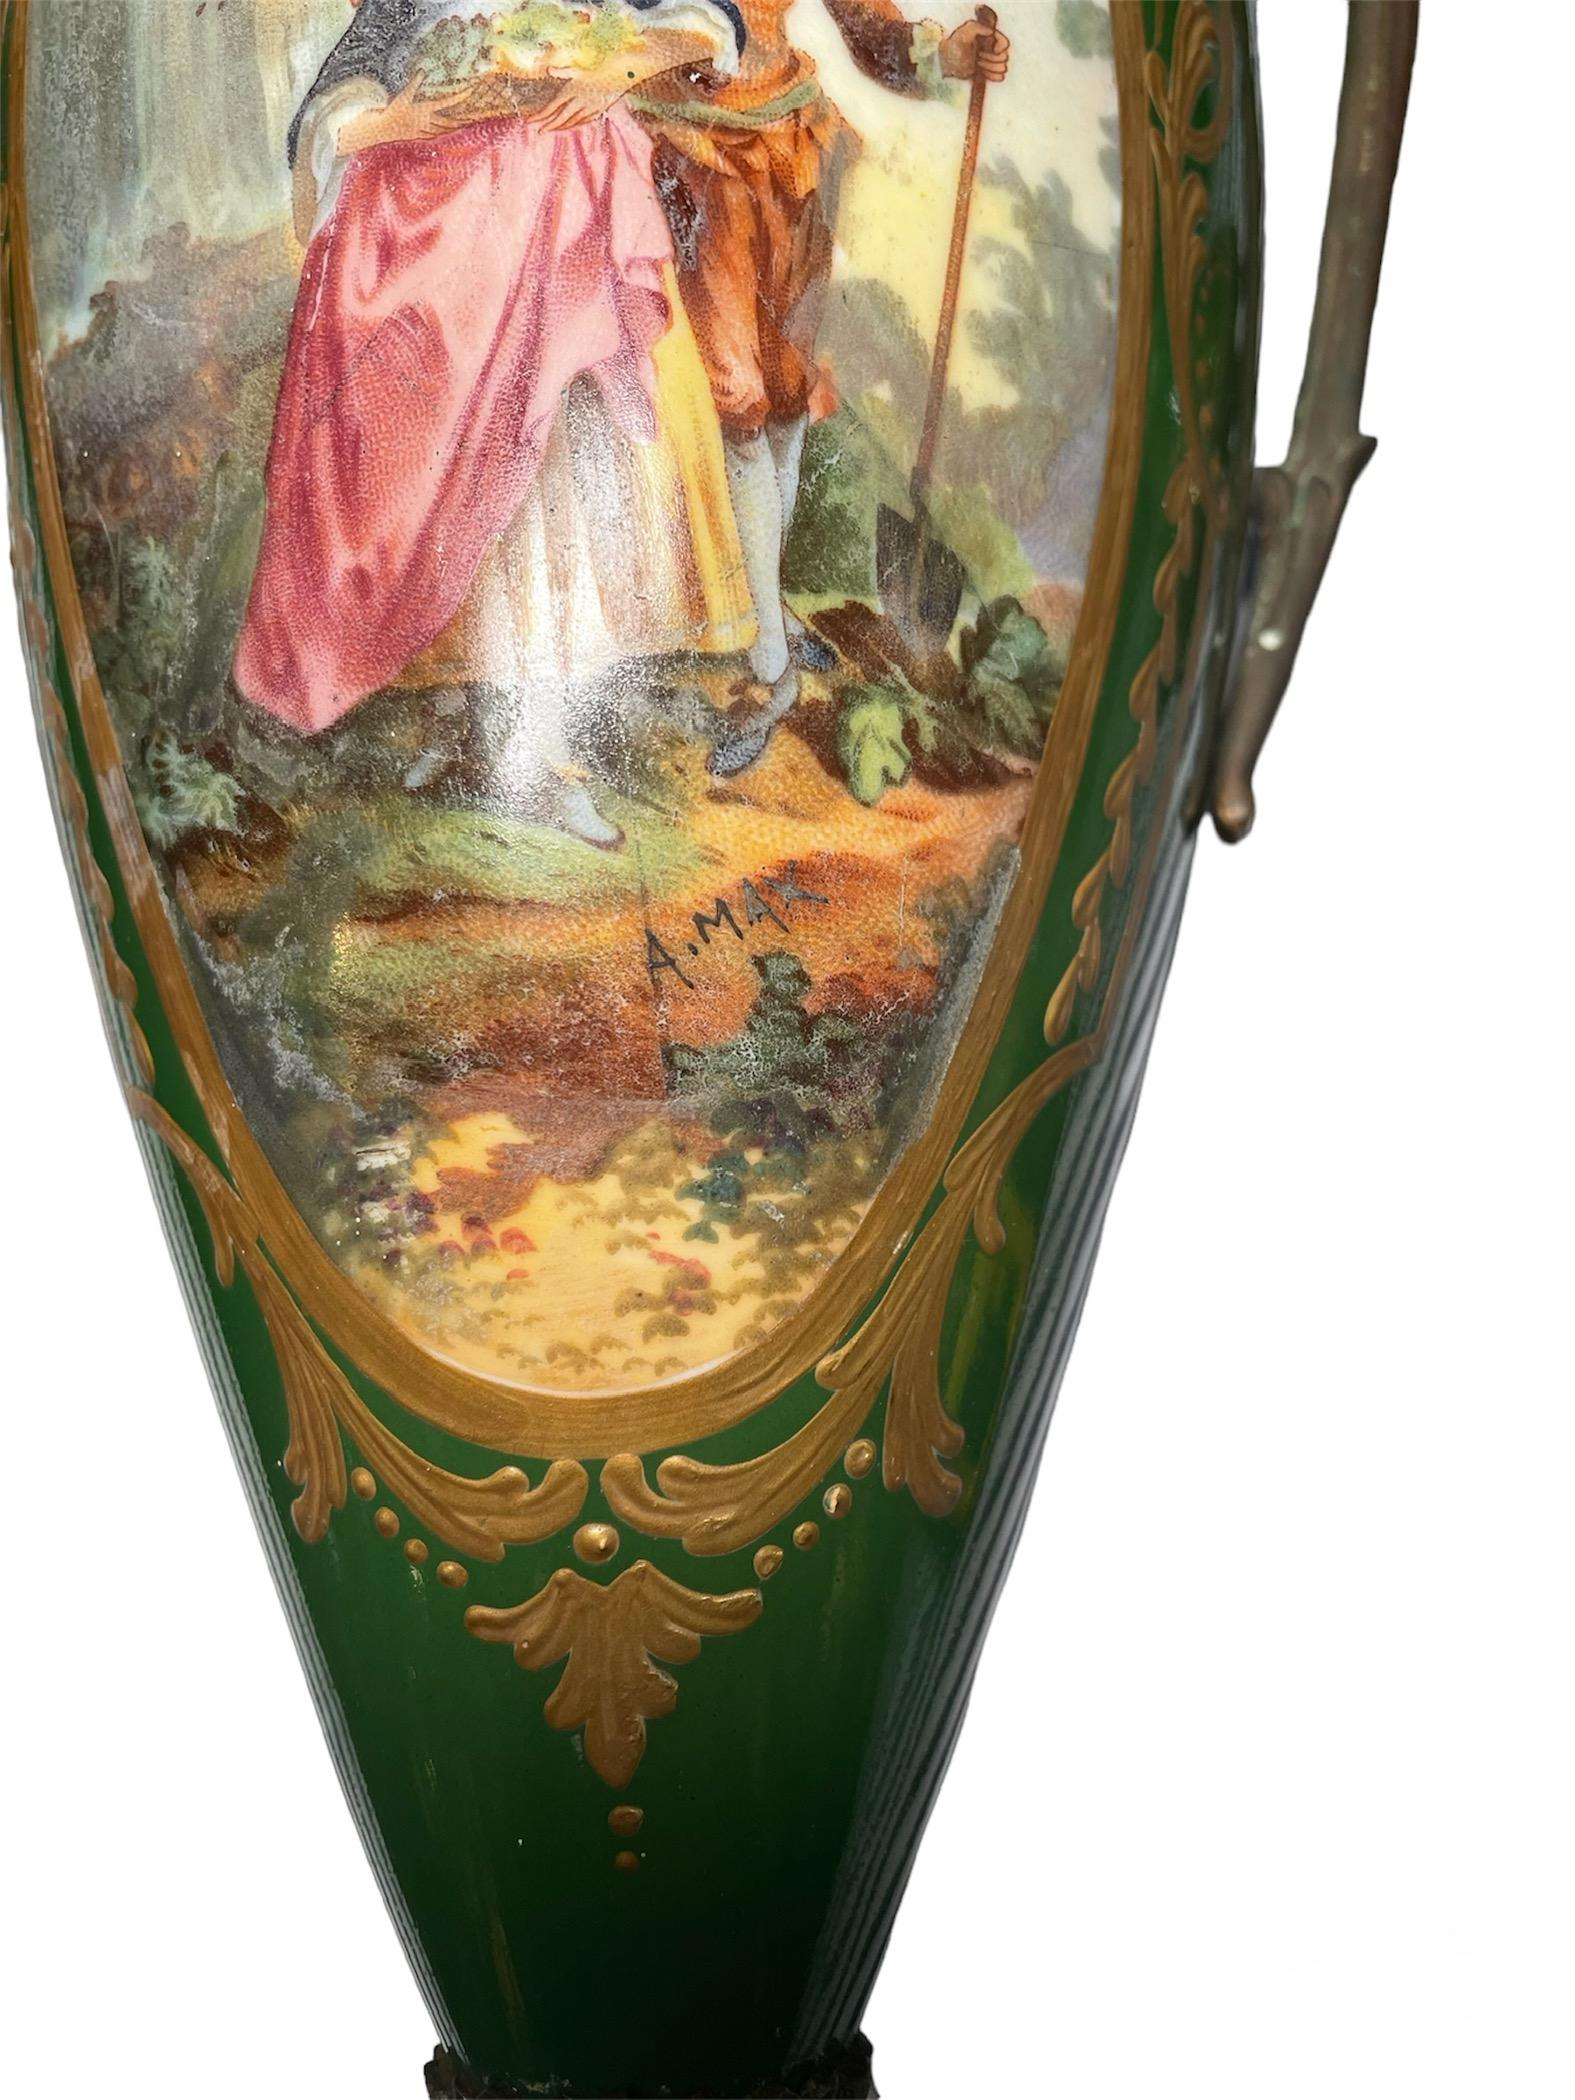 These are a pair of Sevres Style ormolu and green hand-painted and signed lidded porcelain urn vases. Each one depicting a scene of young couples peasants. One is depicting a young girl with a basket of flowers and hugged by a young boy holding a